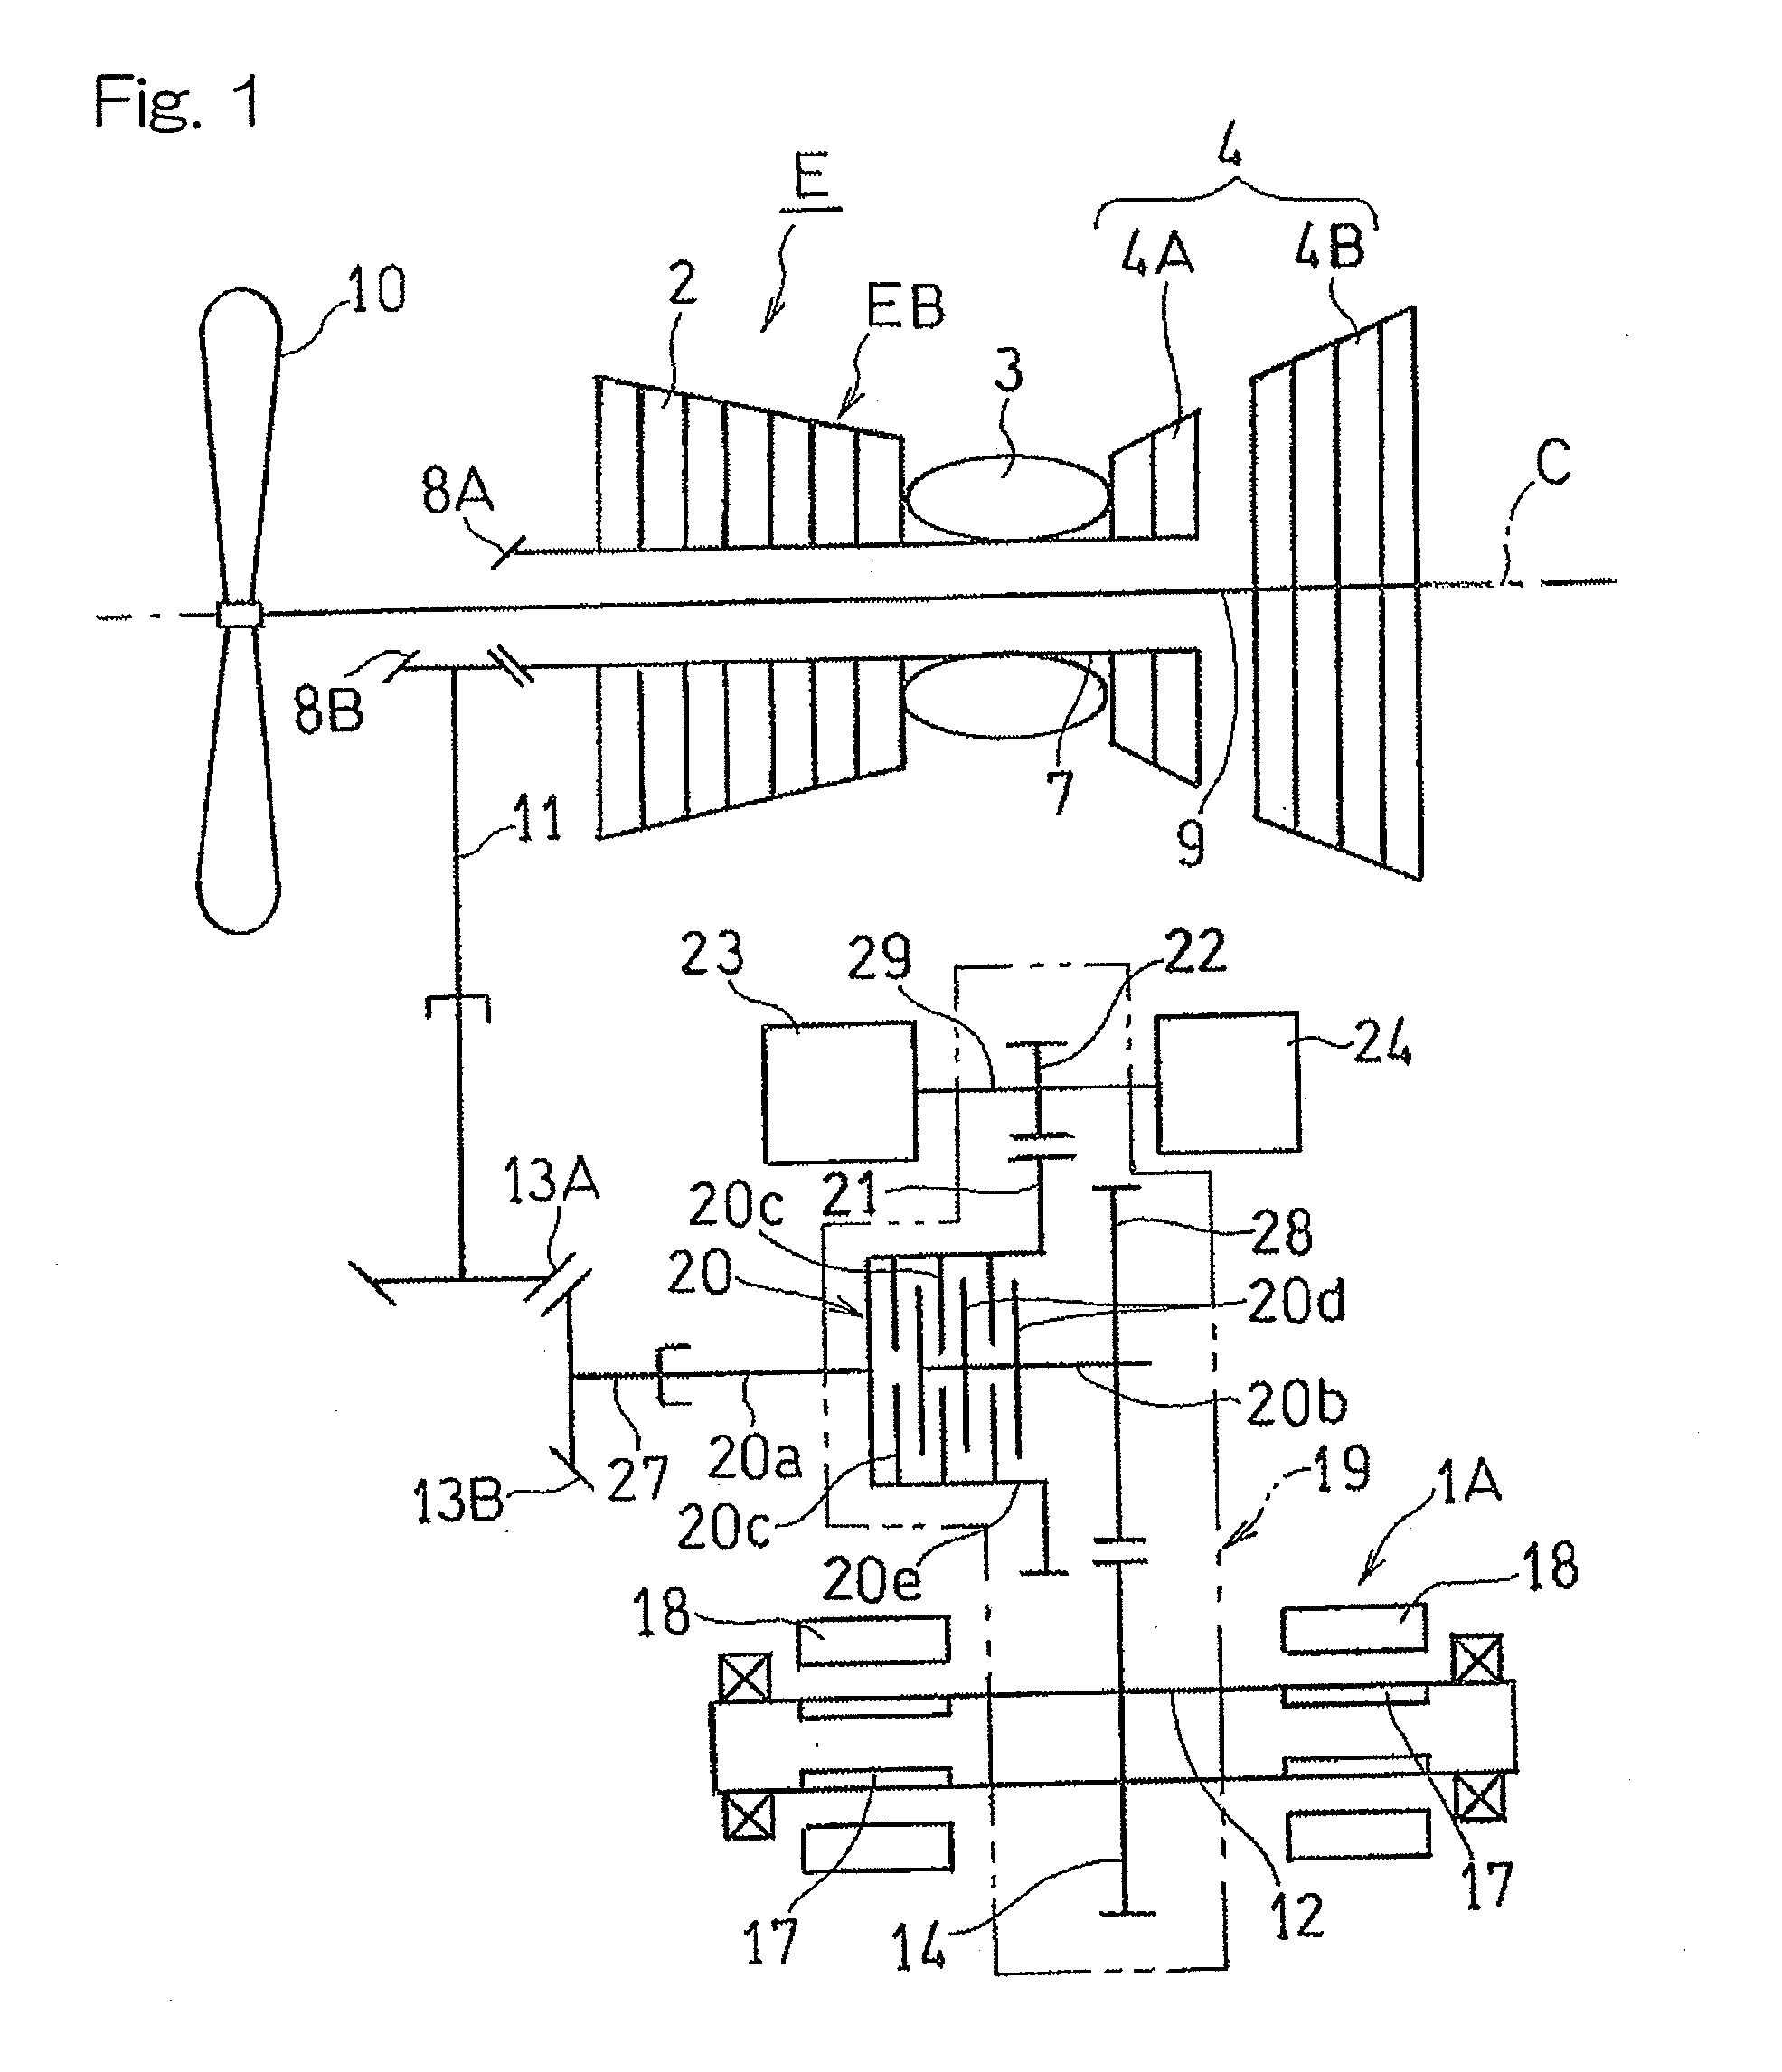 Power generation unit of integrated gearbox design for aircraft engine